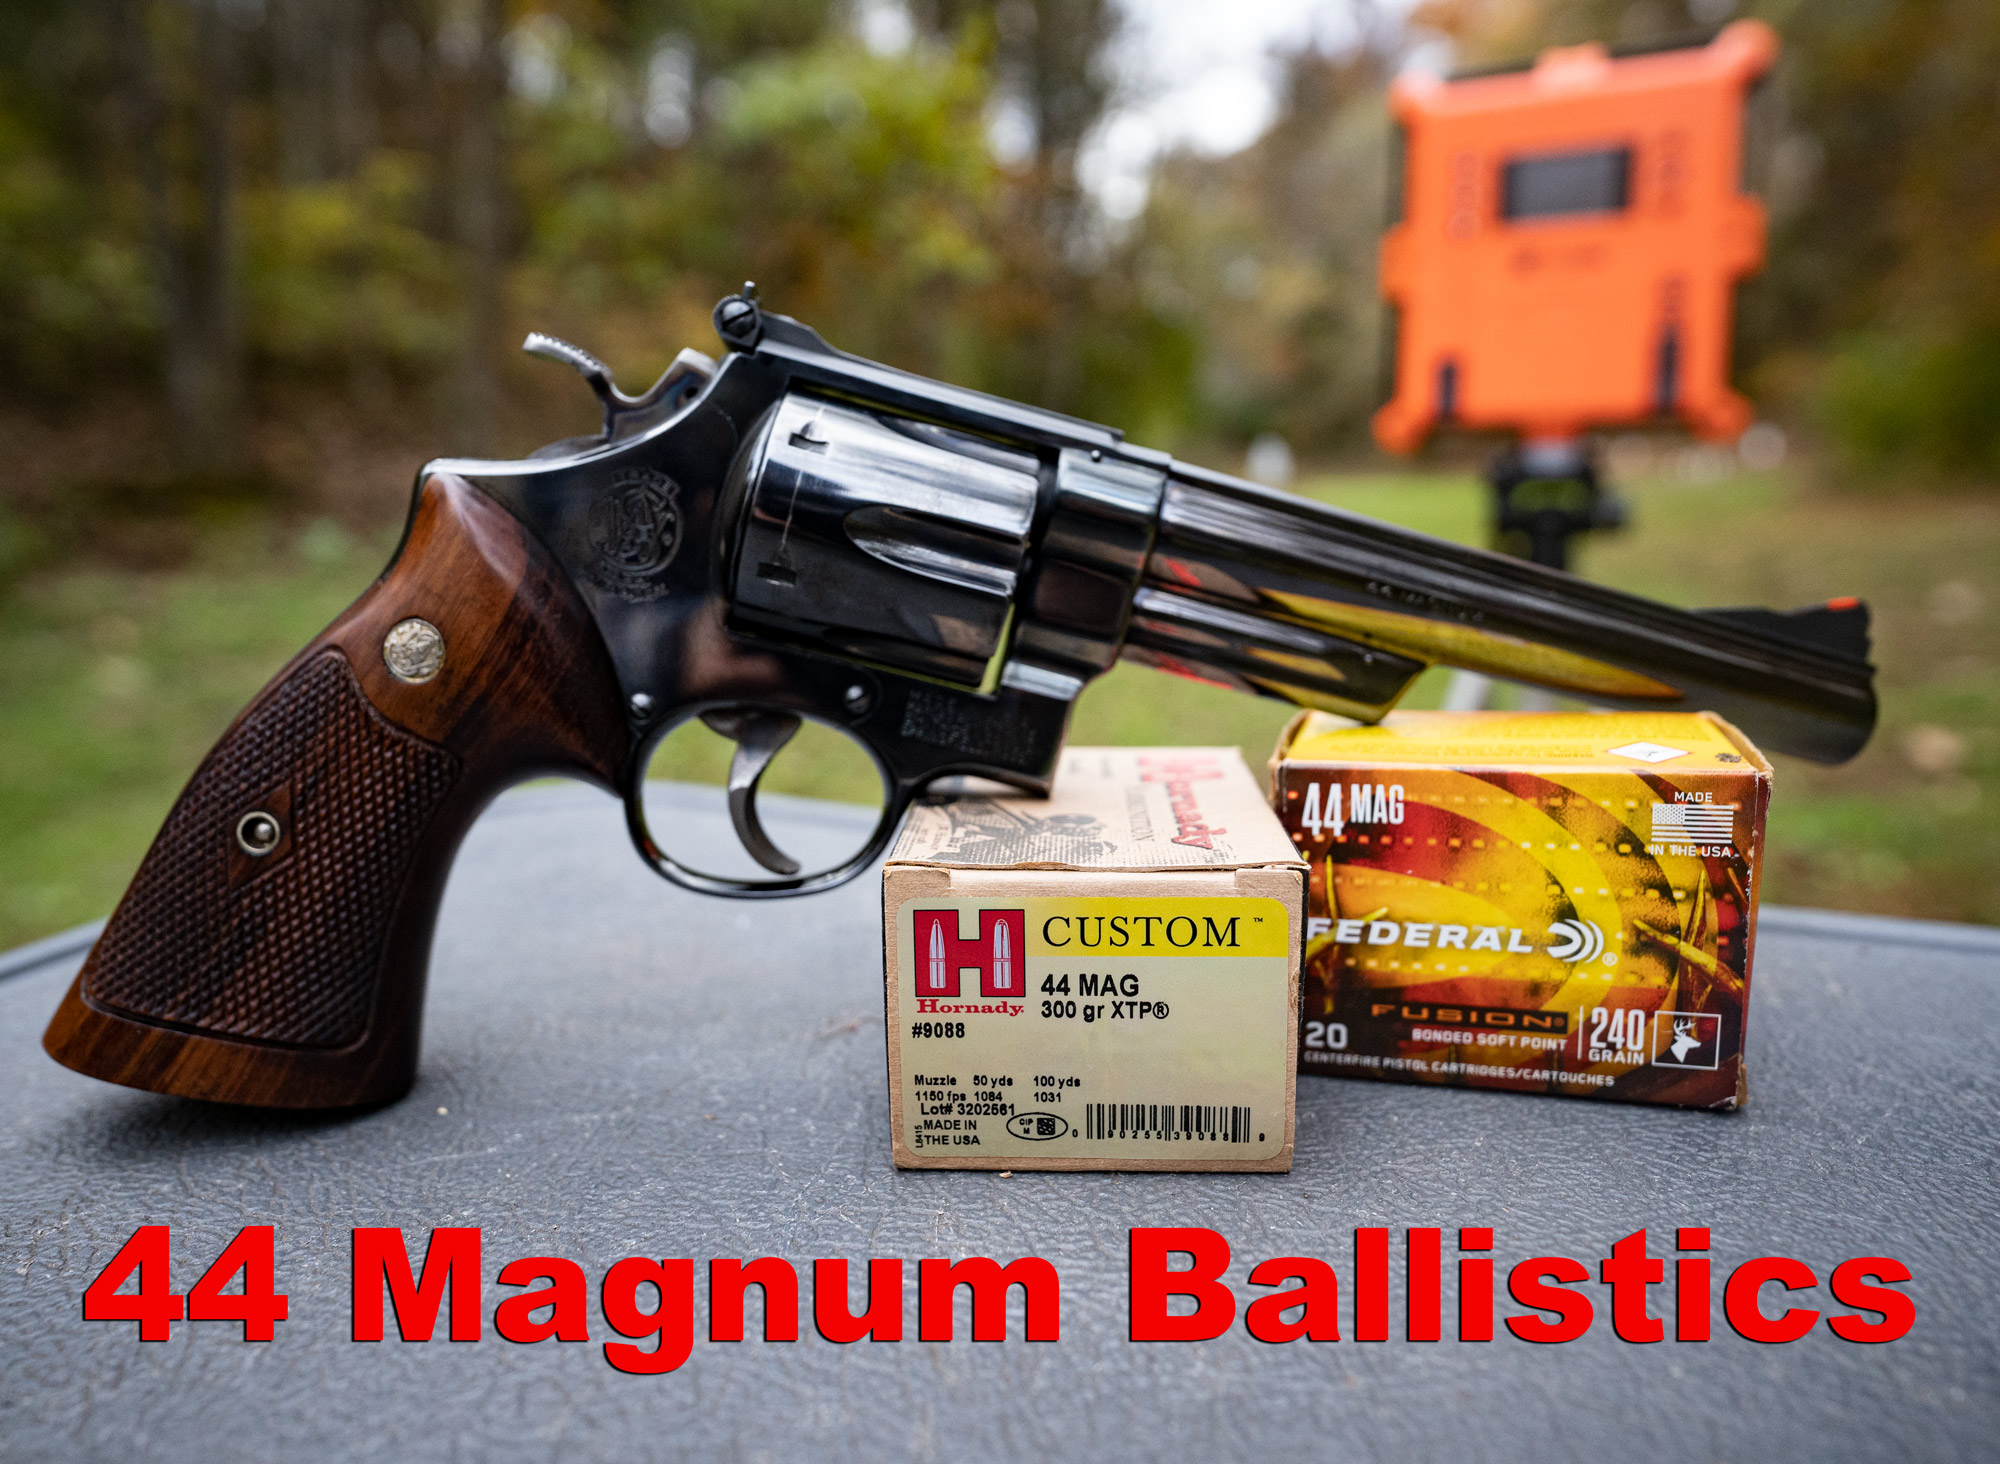 44 magnum ballistics testing with revolver and chronograph at a shooting range